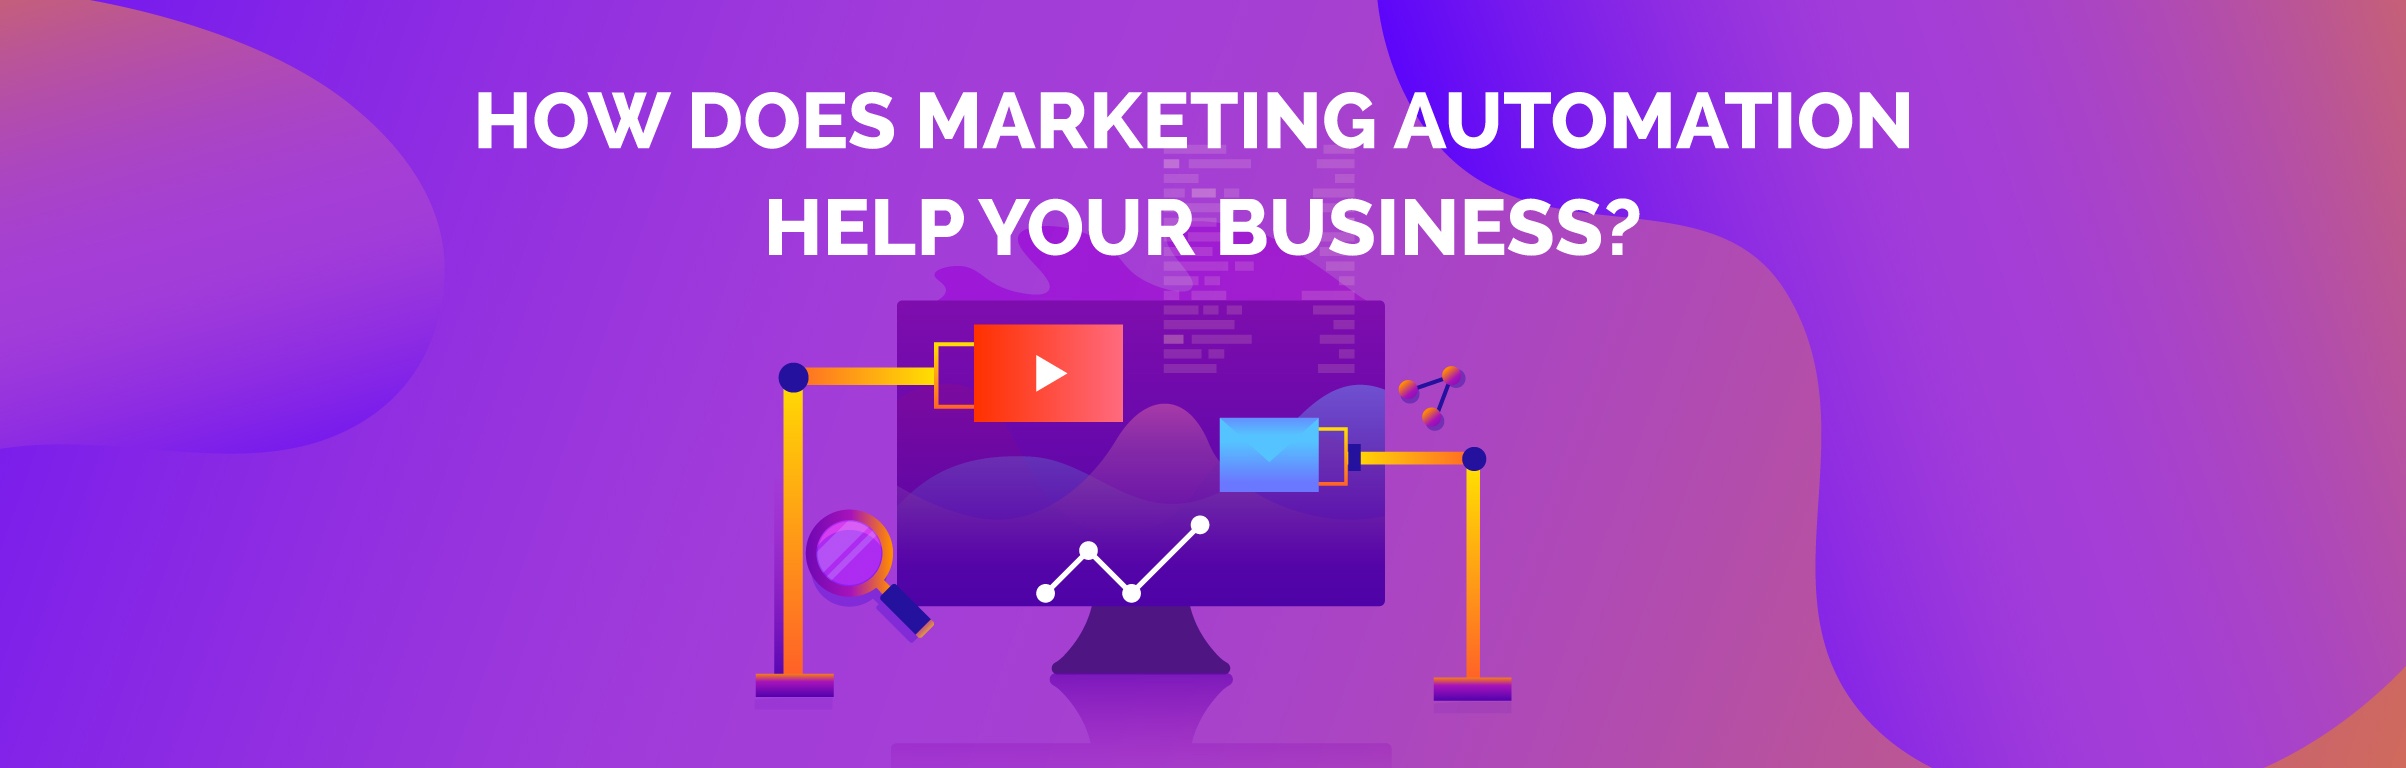 How does marketing automation help your business?